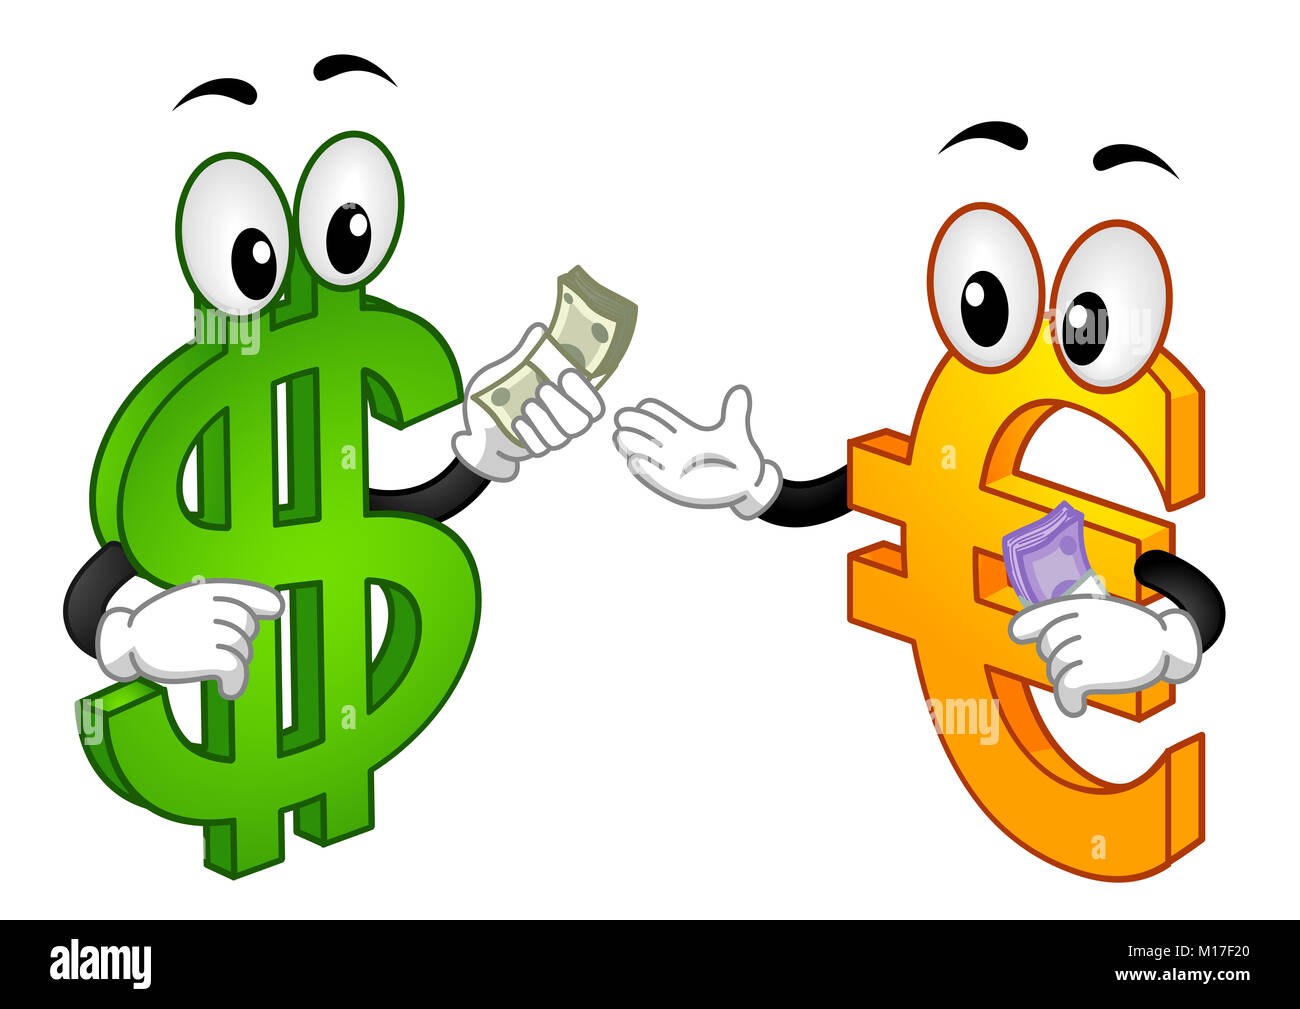 Illustration of a Dollar Mascot Exchanging a Wad of Cash with a Euro Mascot Stock Photo